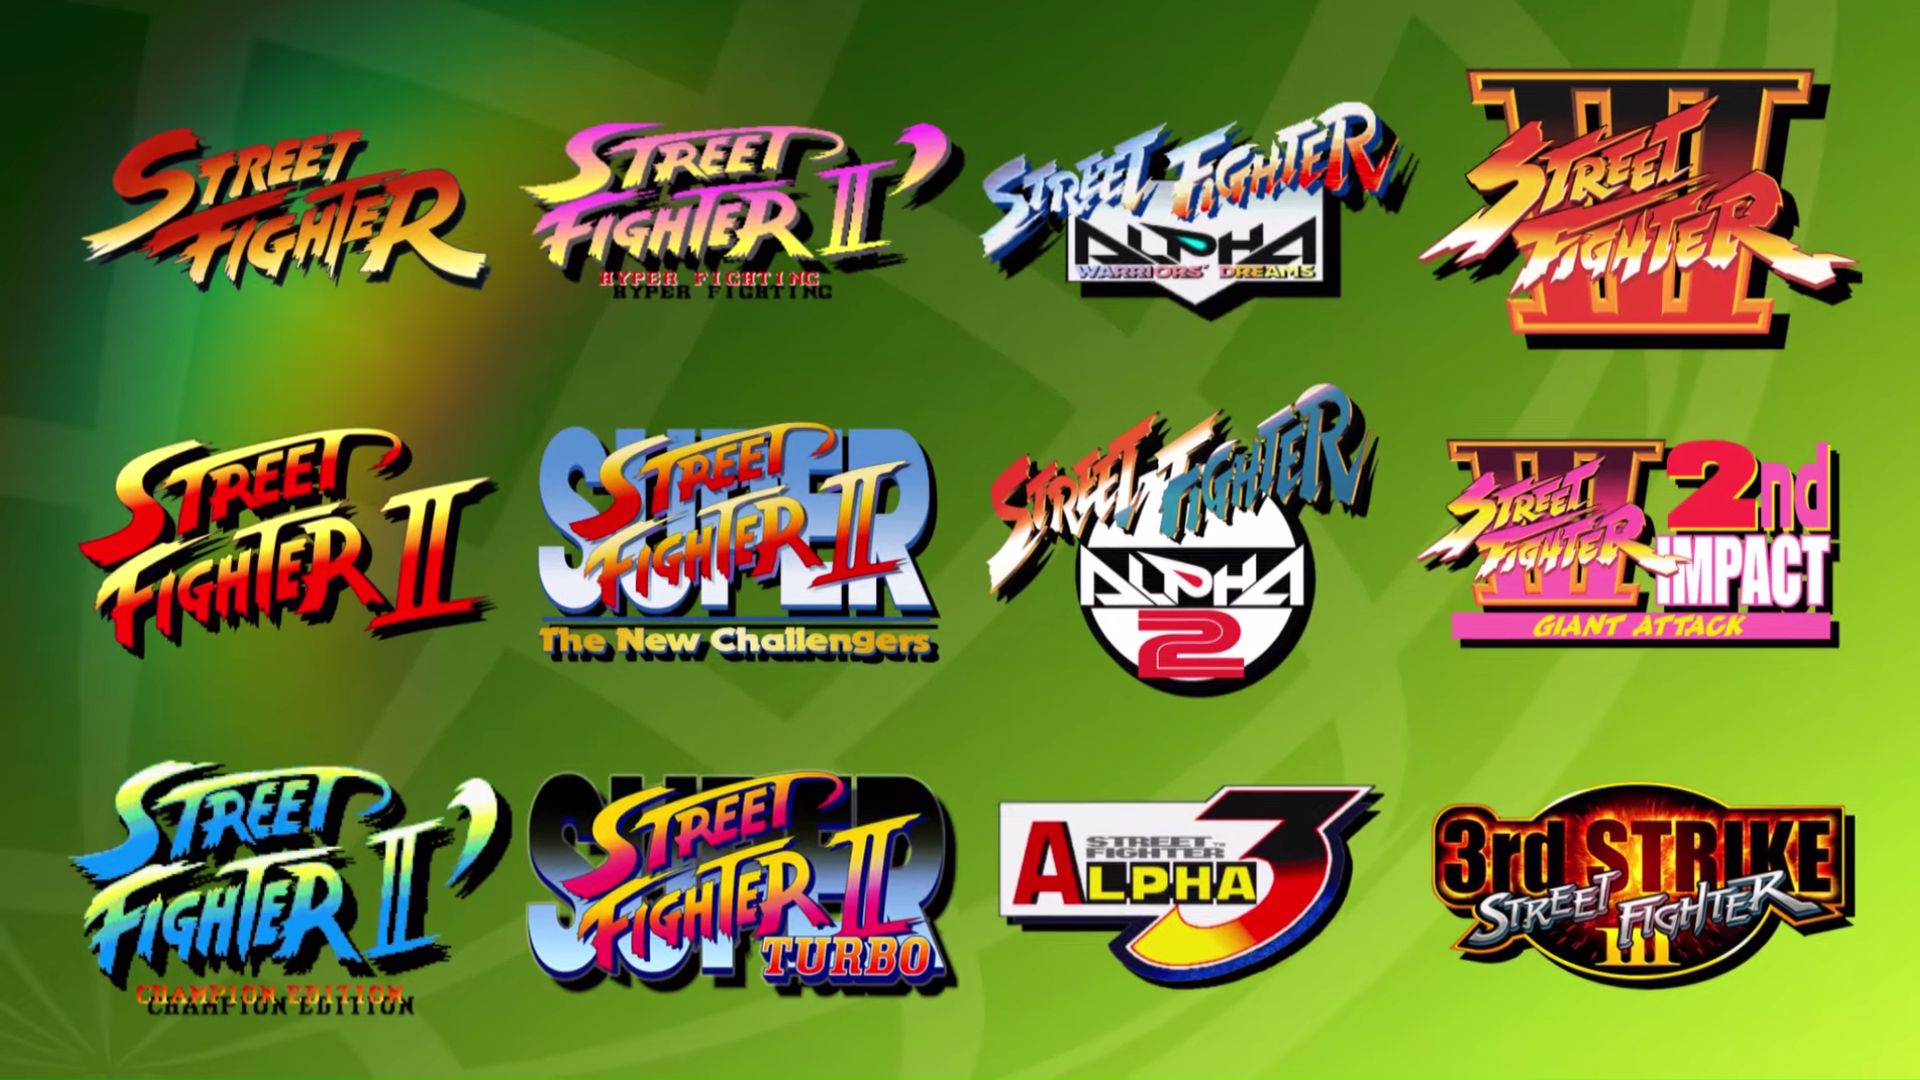 humble is offering a bundle with every mainline entry in the street fighter series for $20